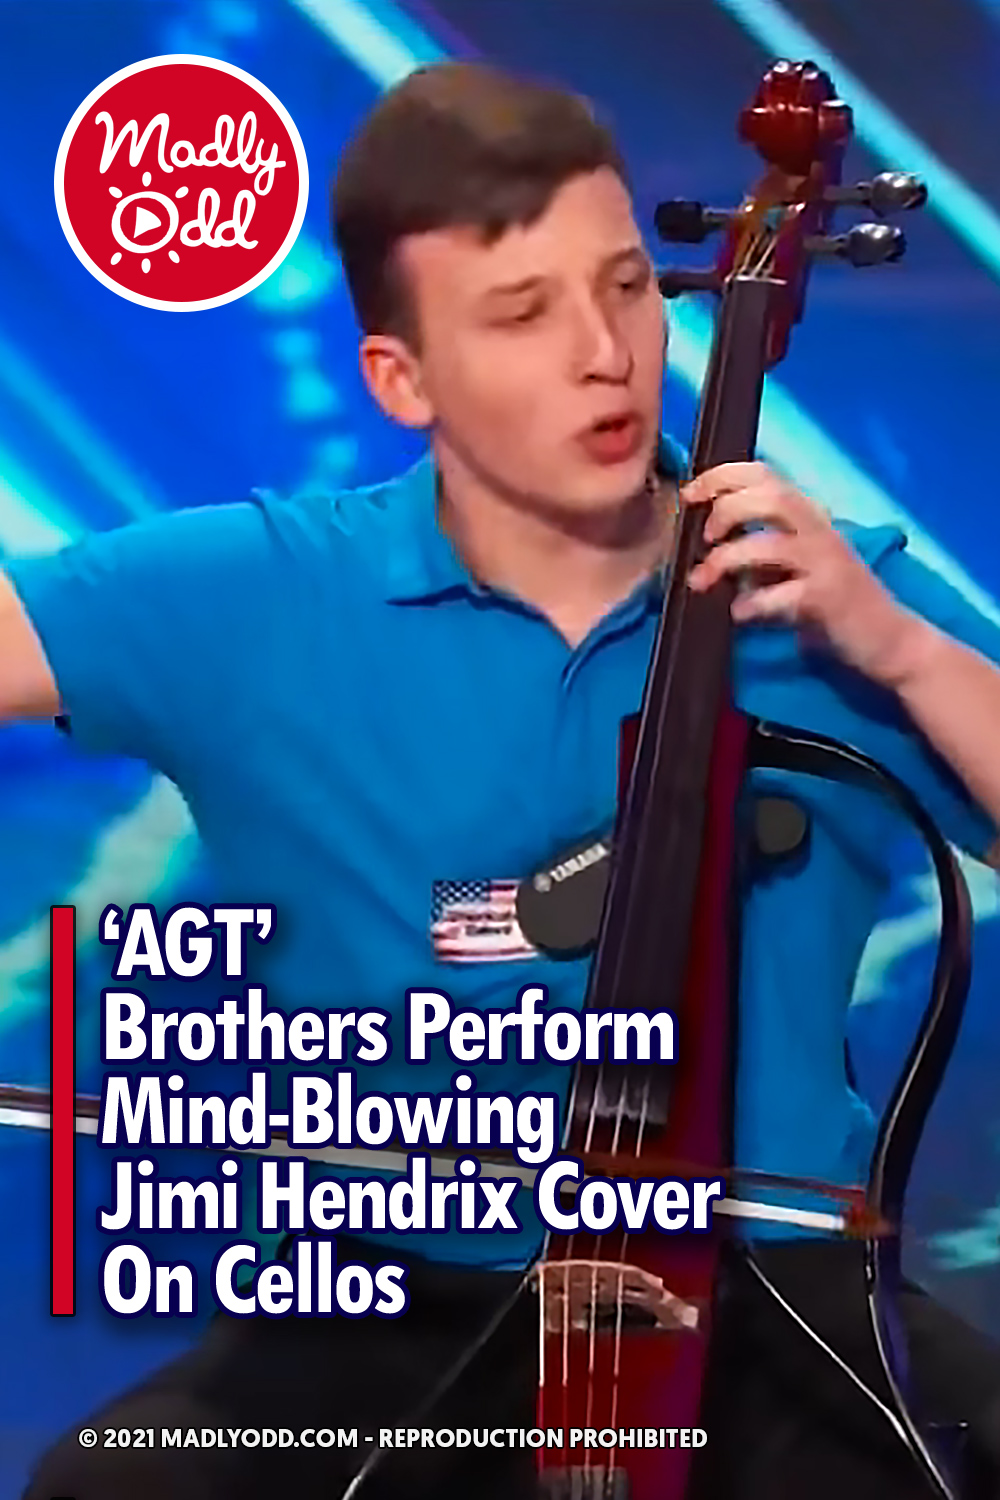 ‘AGT’ Brothers Perform Mind-Blowing Jimi Hendrix Cover On Cellos